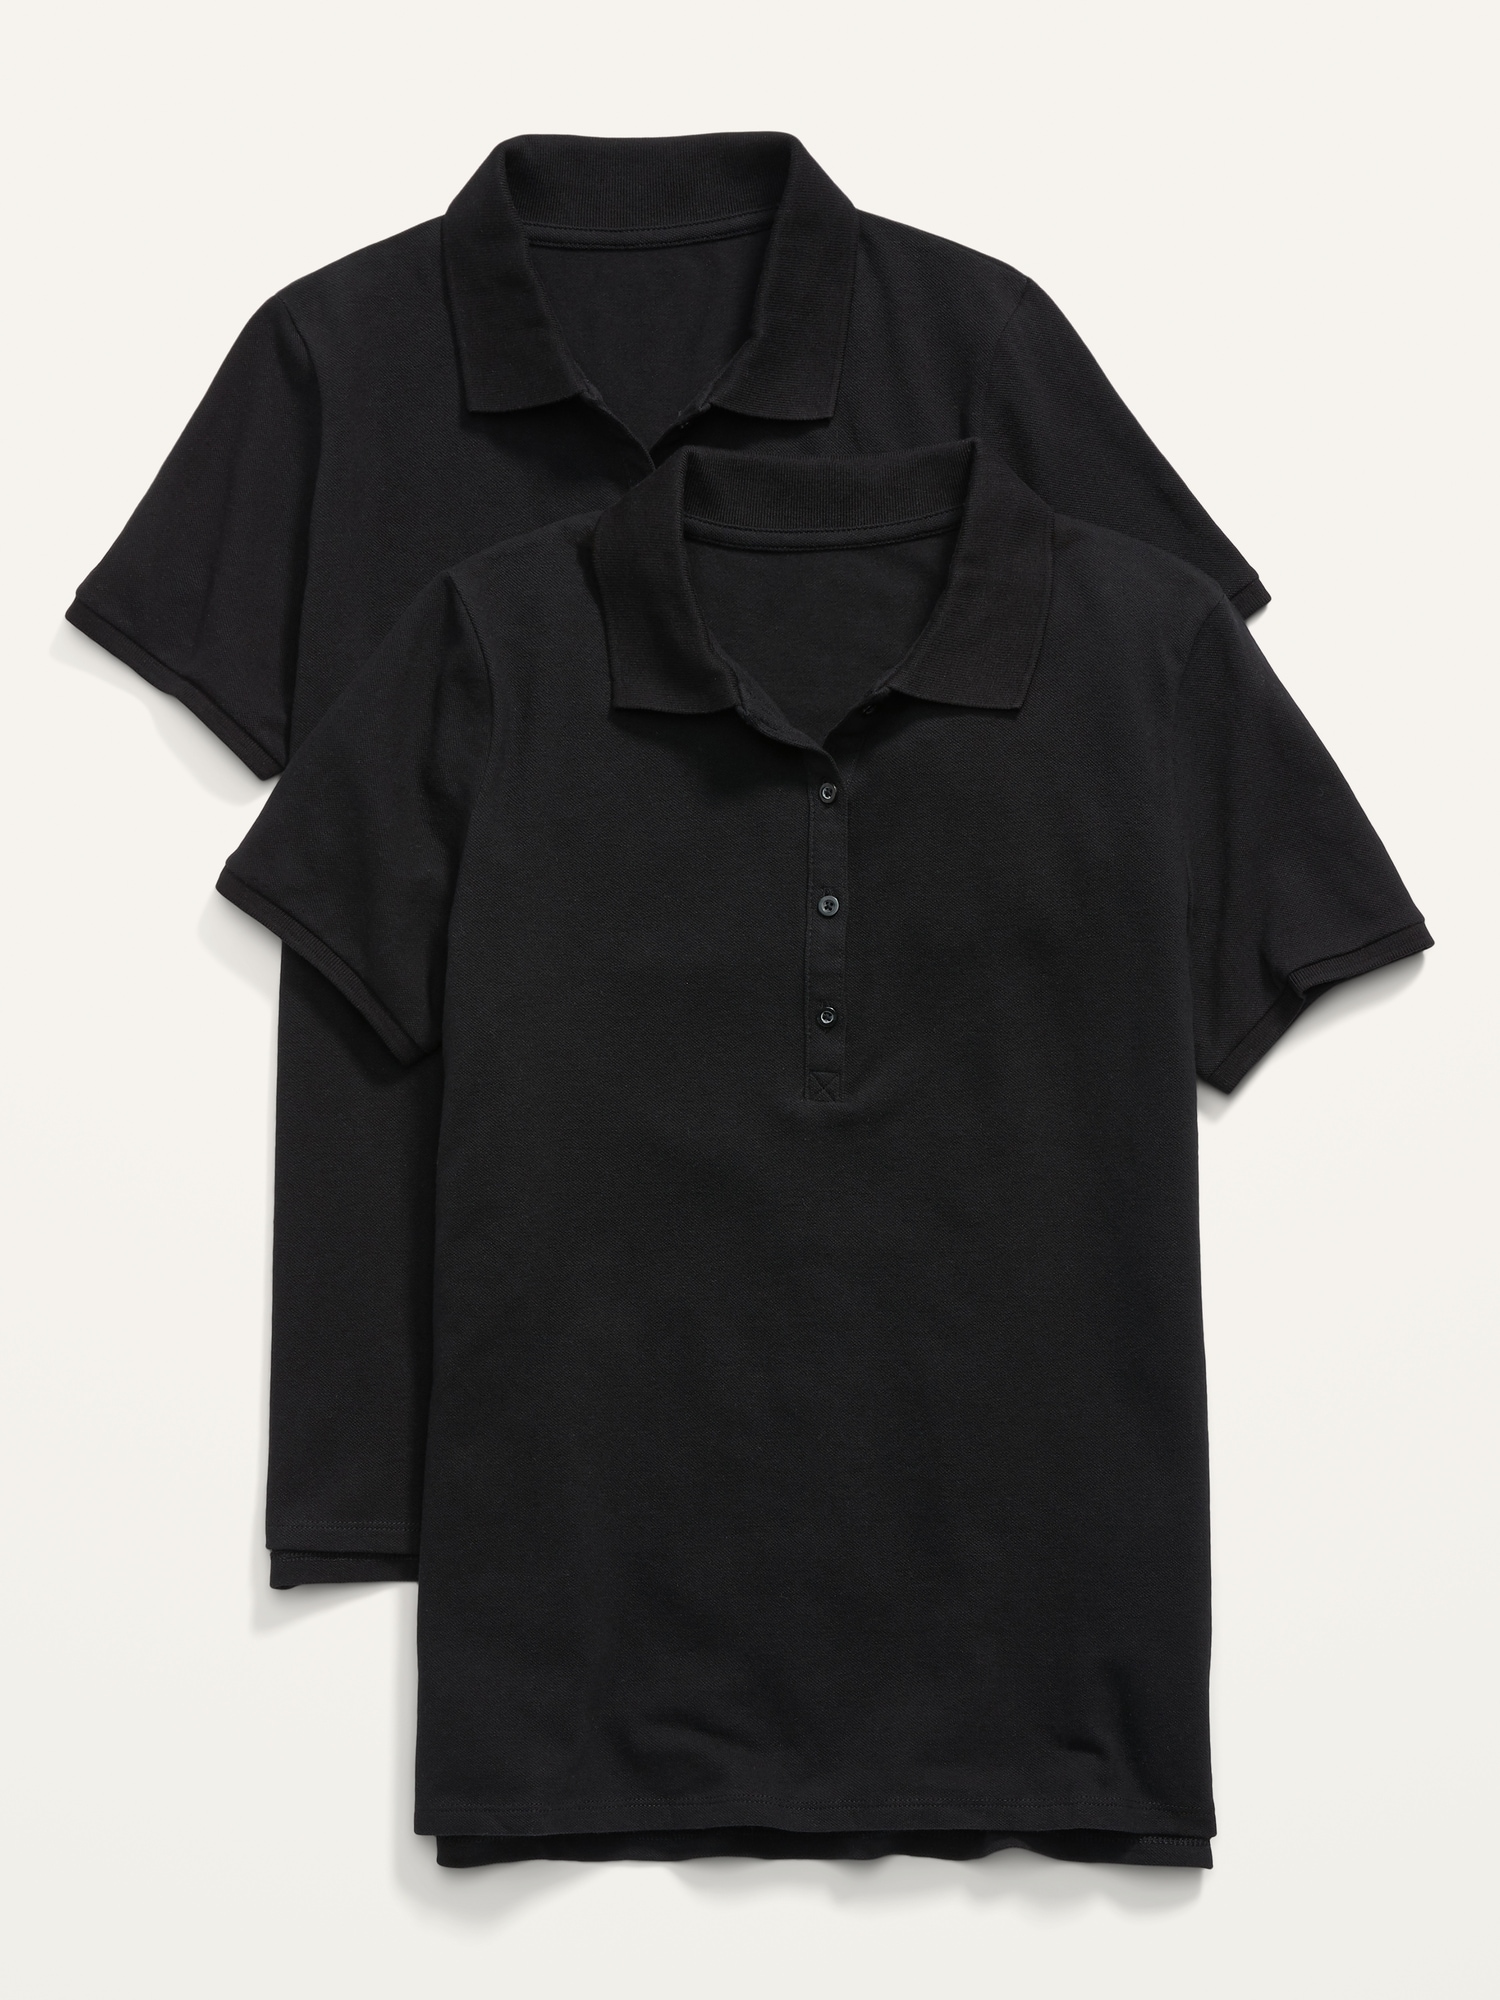 Old Navy Semi-Fitted Uniform Pique Polo Shirt 2-Pack for Women black. 1